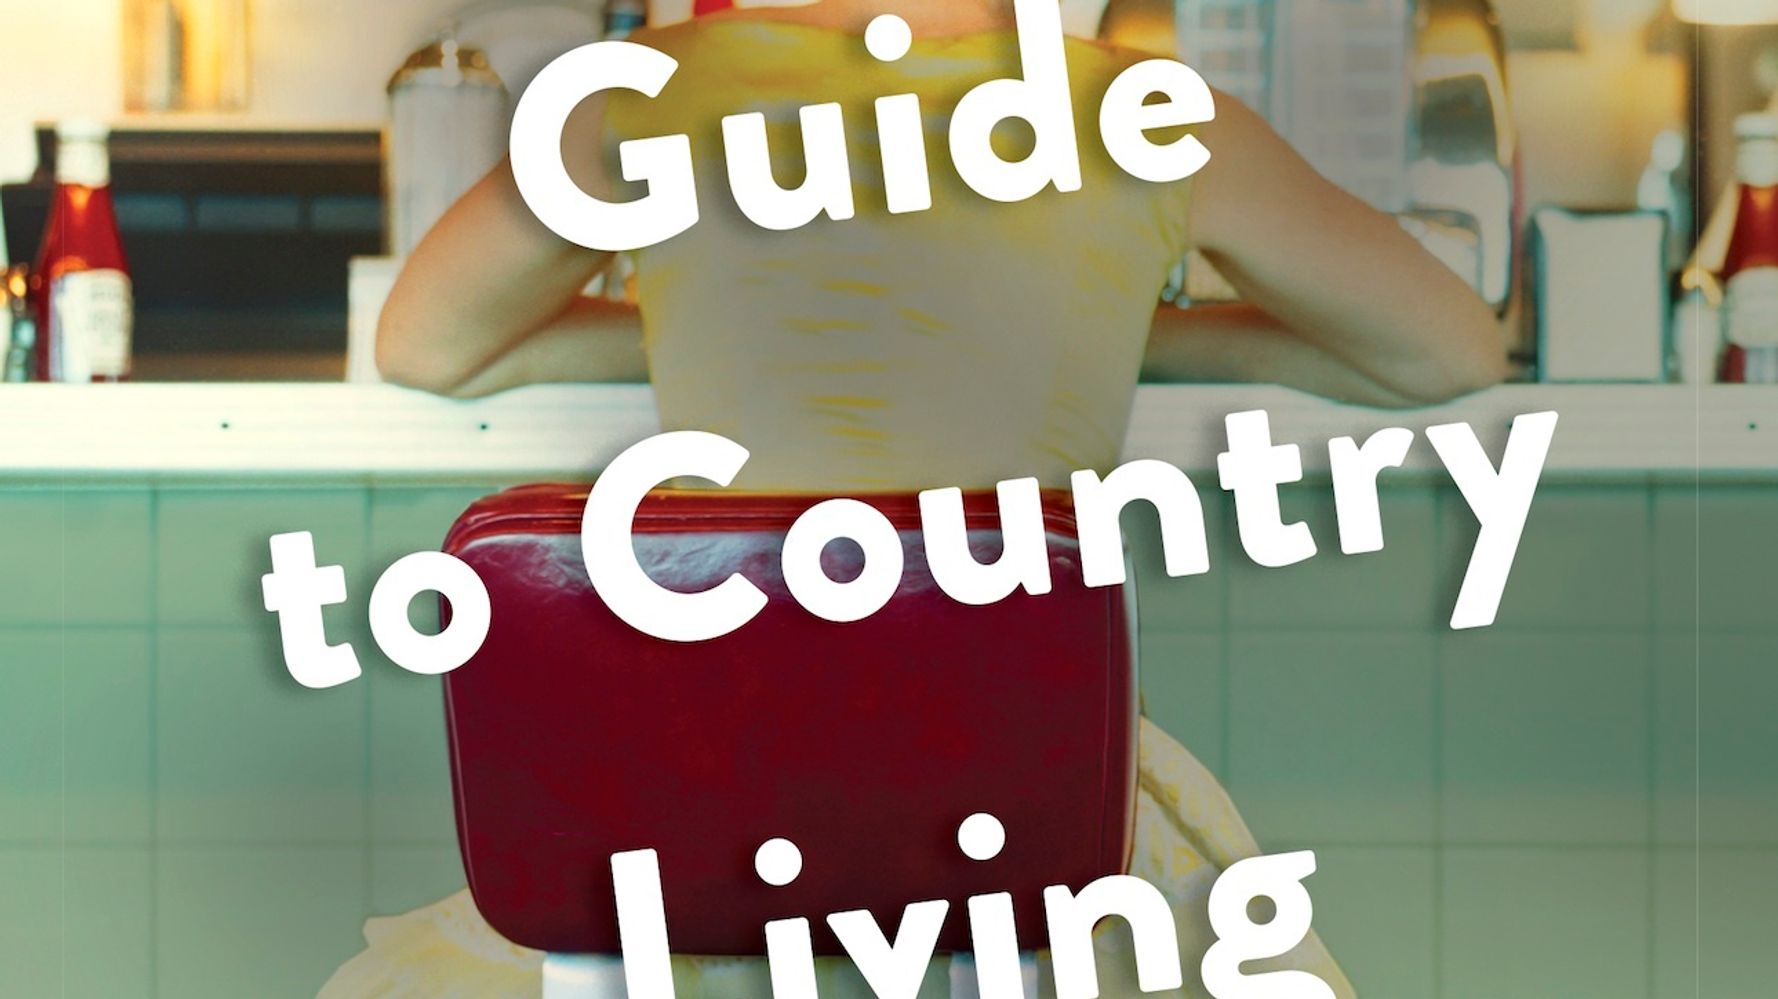 Louise Miller, “A City Baker's Guide to Country Living” on Vimeo